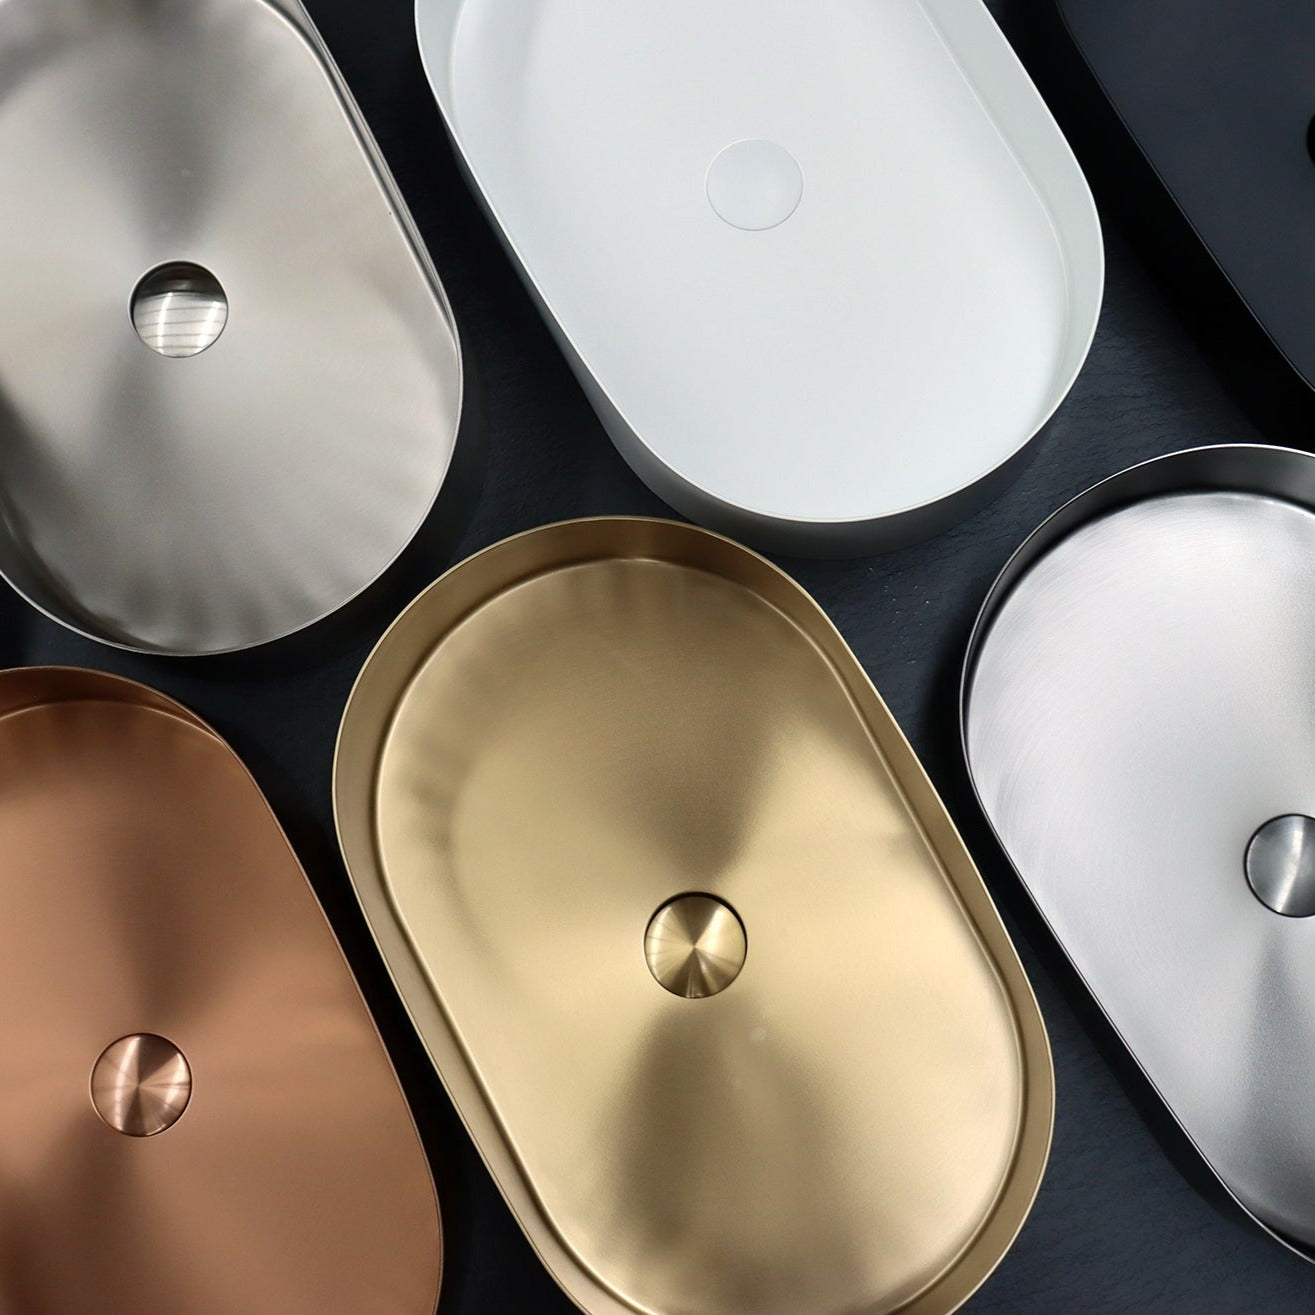 FUSION OVAL STAINLESS STEEL BASINS